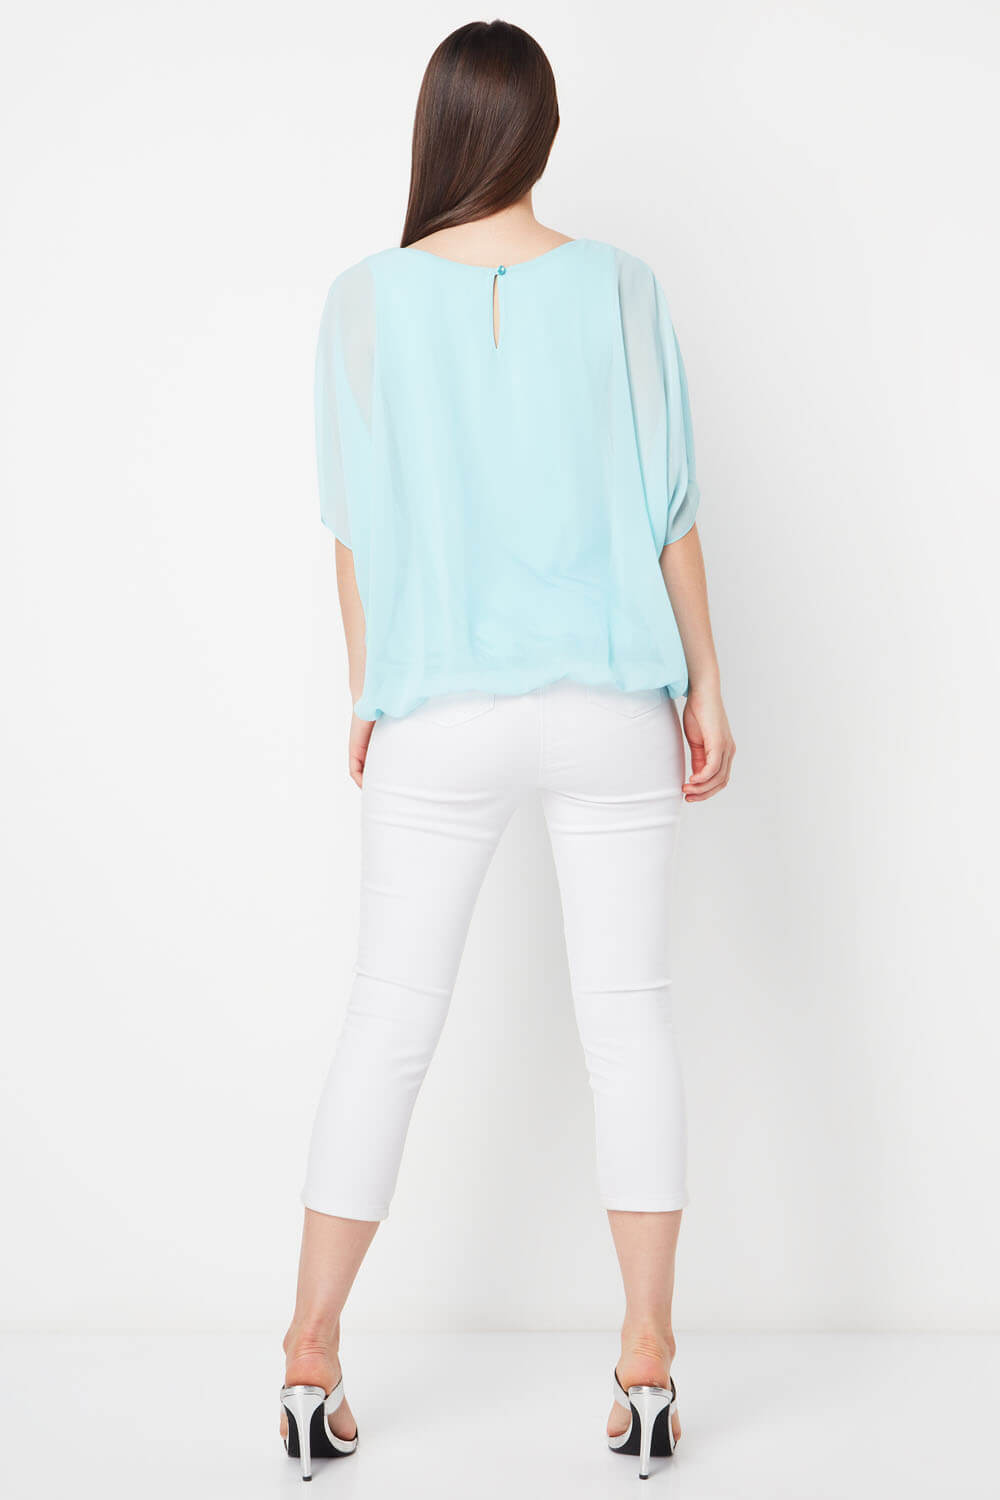 Turquoise Bubble Hem Top, Image 3 of 8